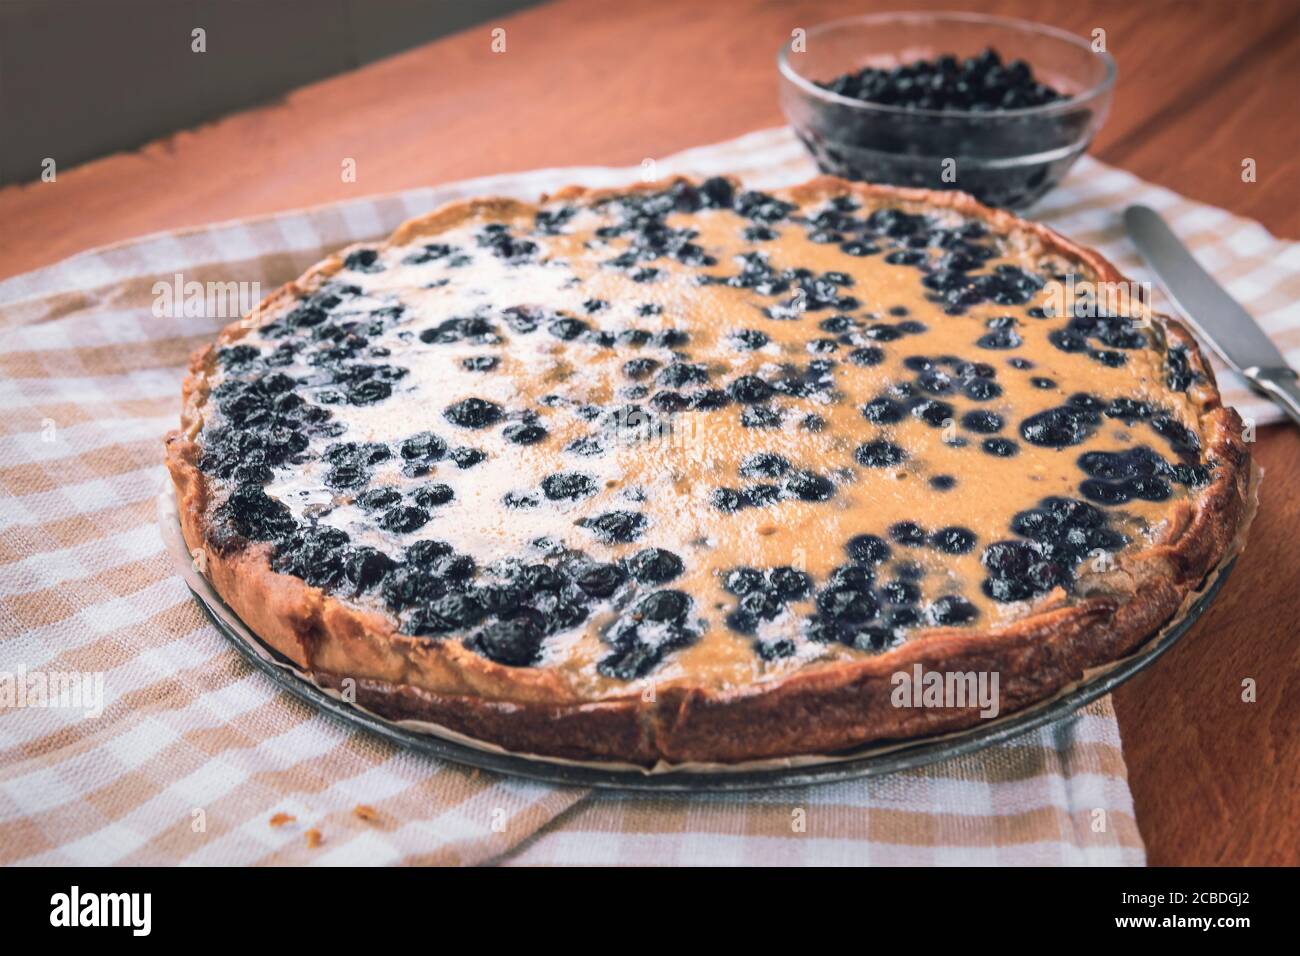 Sweet pastries, Blueberry pie on wooden table, top view. Stock Photo